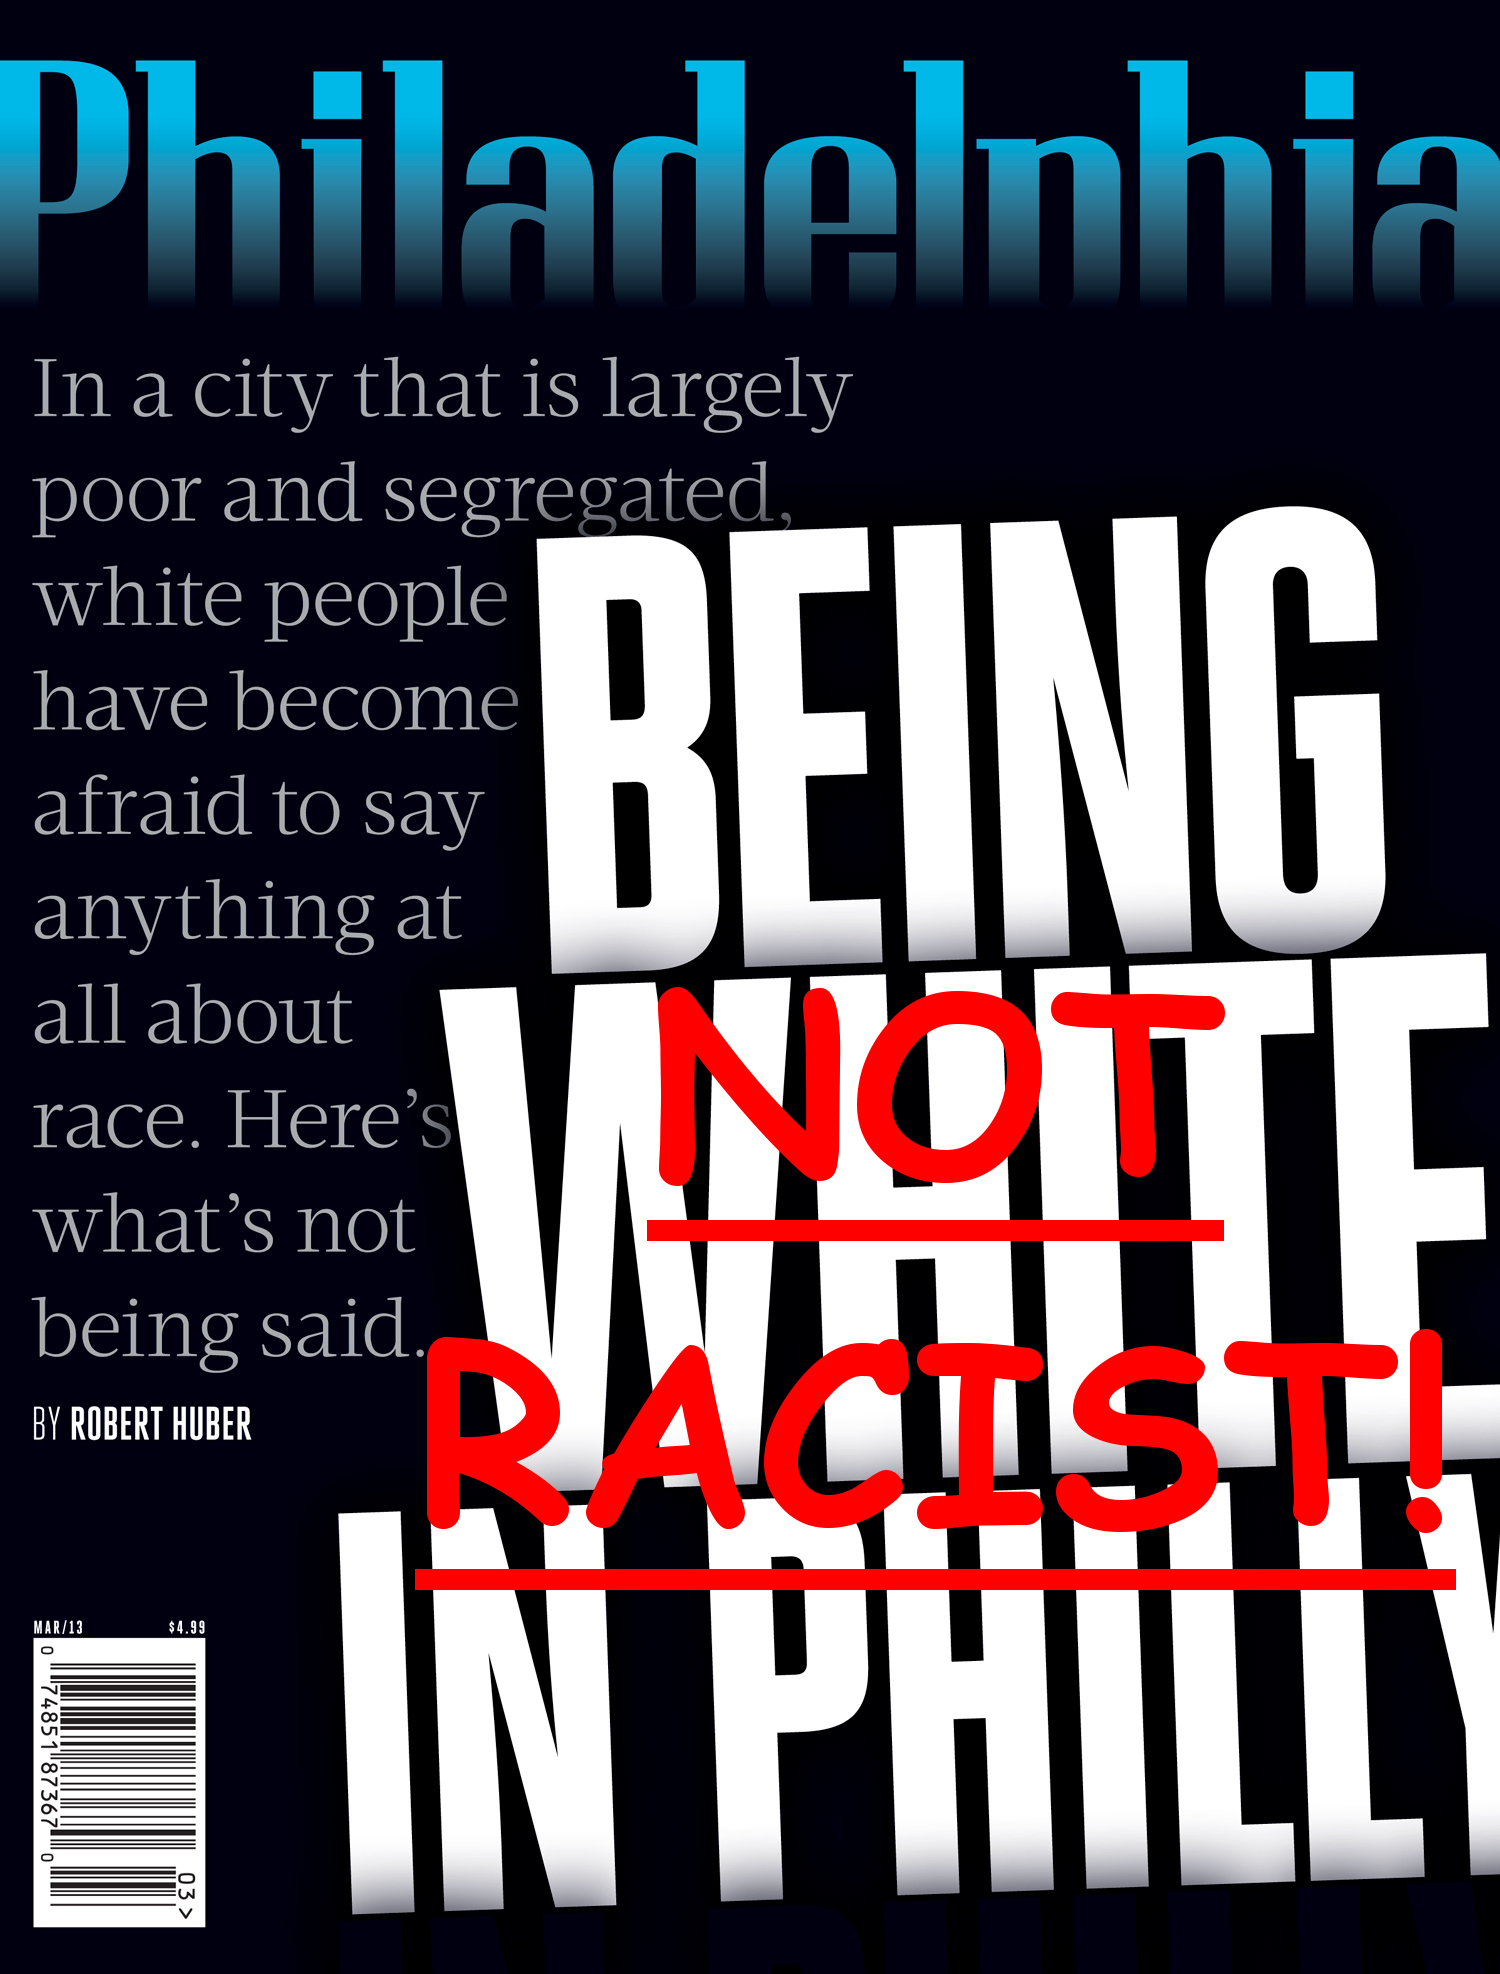 In a city that is largely poor and segregated, white people have become afraid to say anything all all about race.... Robert Huber